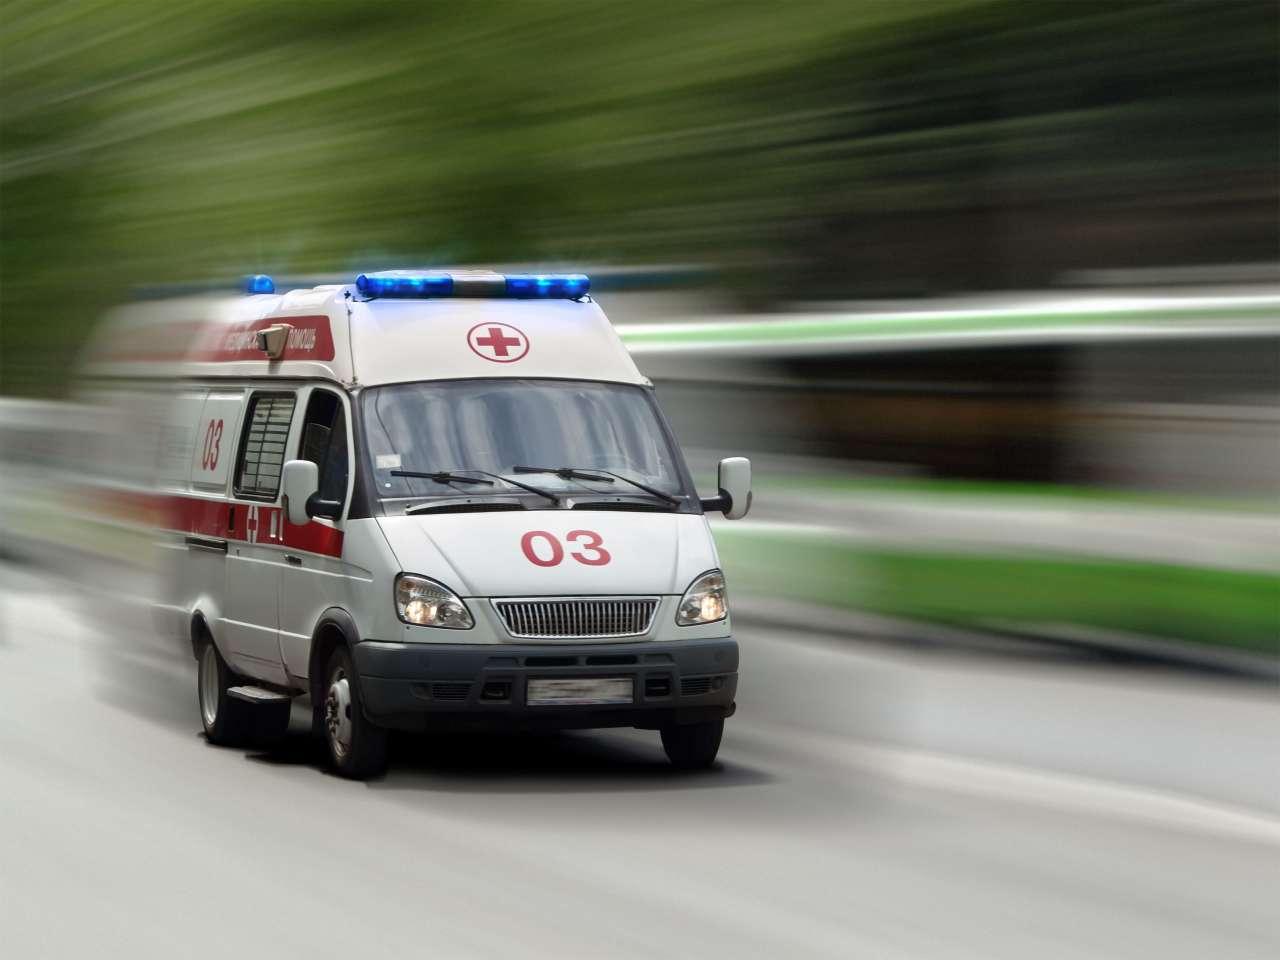 Car accident leaves 8 people dead in Russia’s Voronezh region